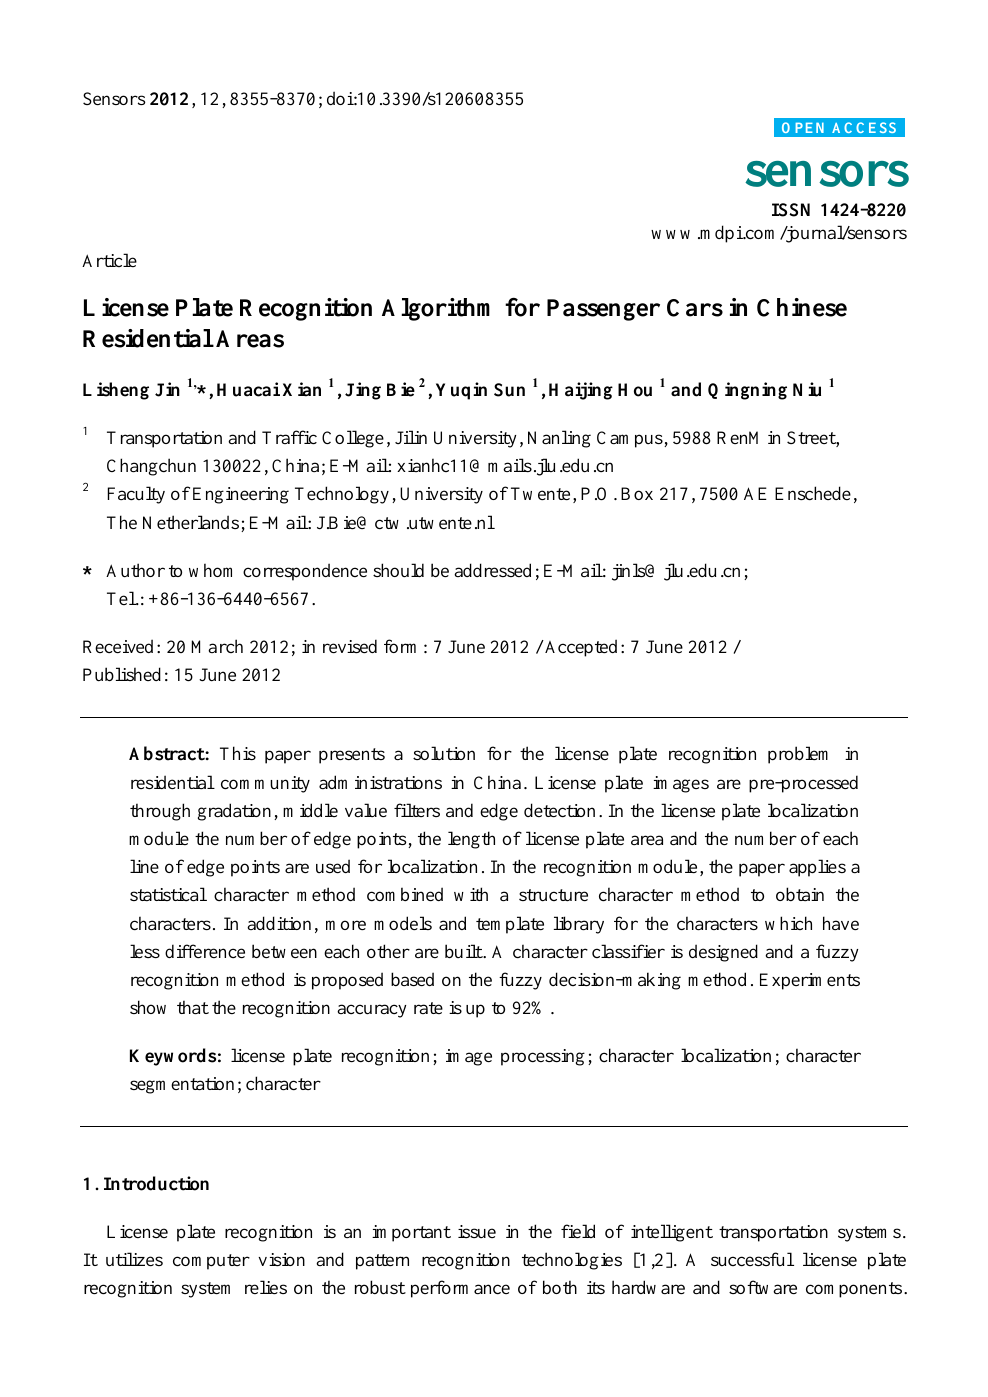 License Plate Recognition Algorithm For Passenger Cars In Chinese Residential Areas Topic Of Research Paper In Materials Engineering Download Scholarly Article Pdf And Read For Free On Cyberleninka Open Science Hub